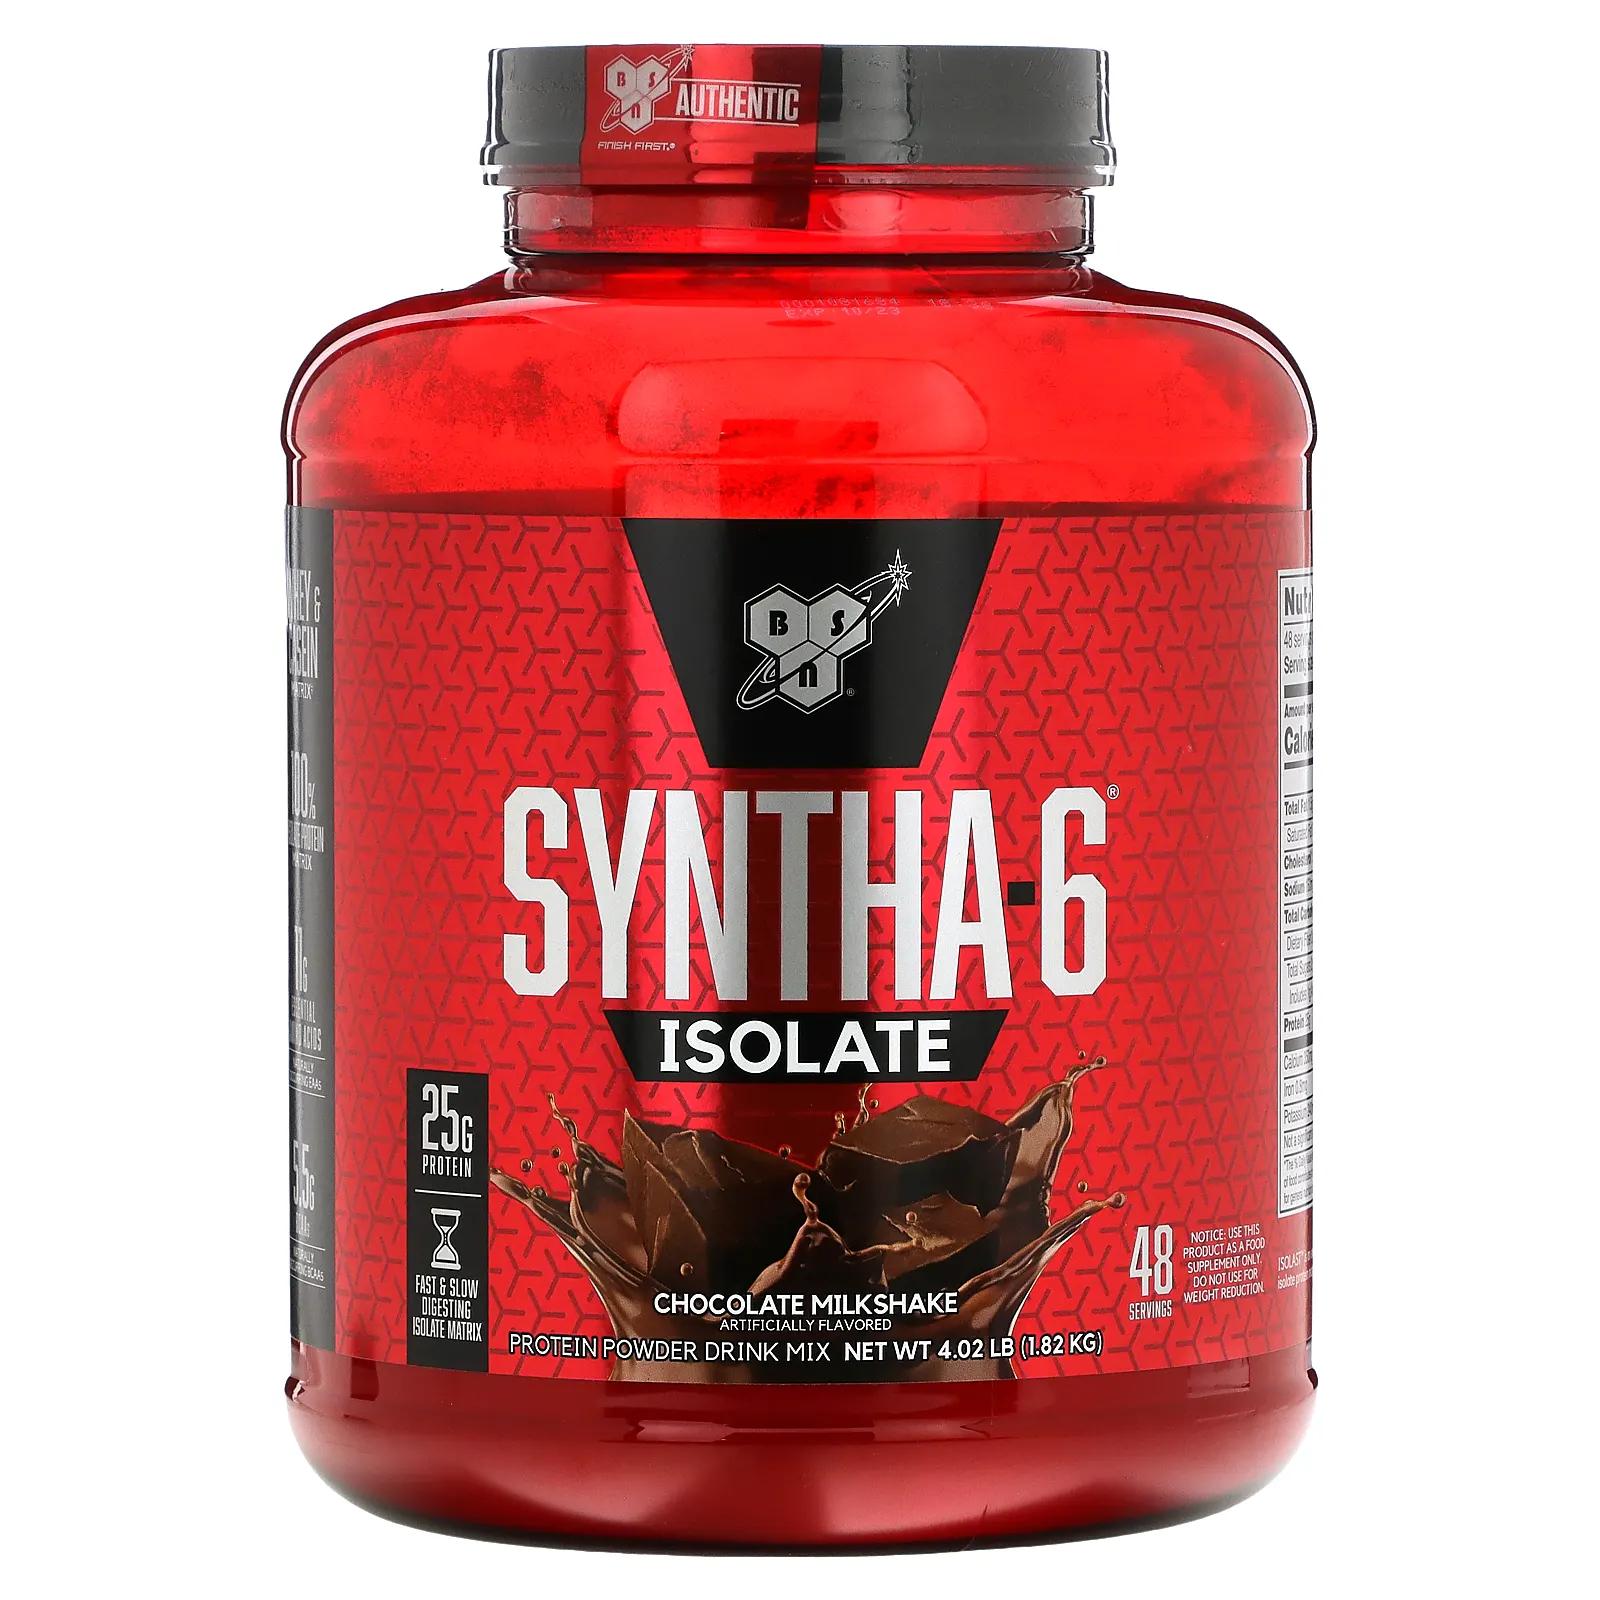 BSN Syntha-6 Isolate Protein Powder Drink Mix Chocolate Milkshake 4.02 lbs (1.82 kg) bsn syntha 6 ultra premium protein matrix powder drink mix chocolate peanut butter